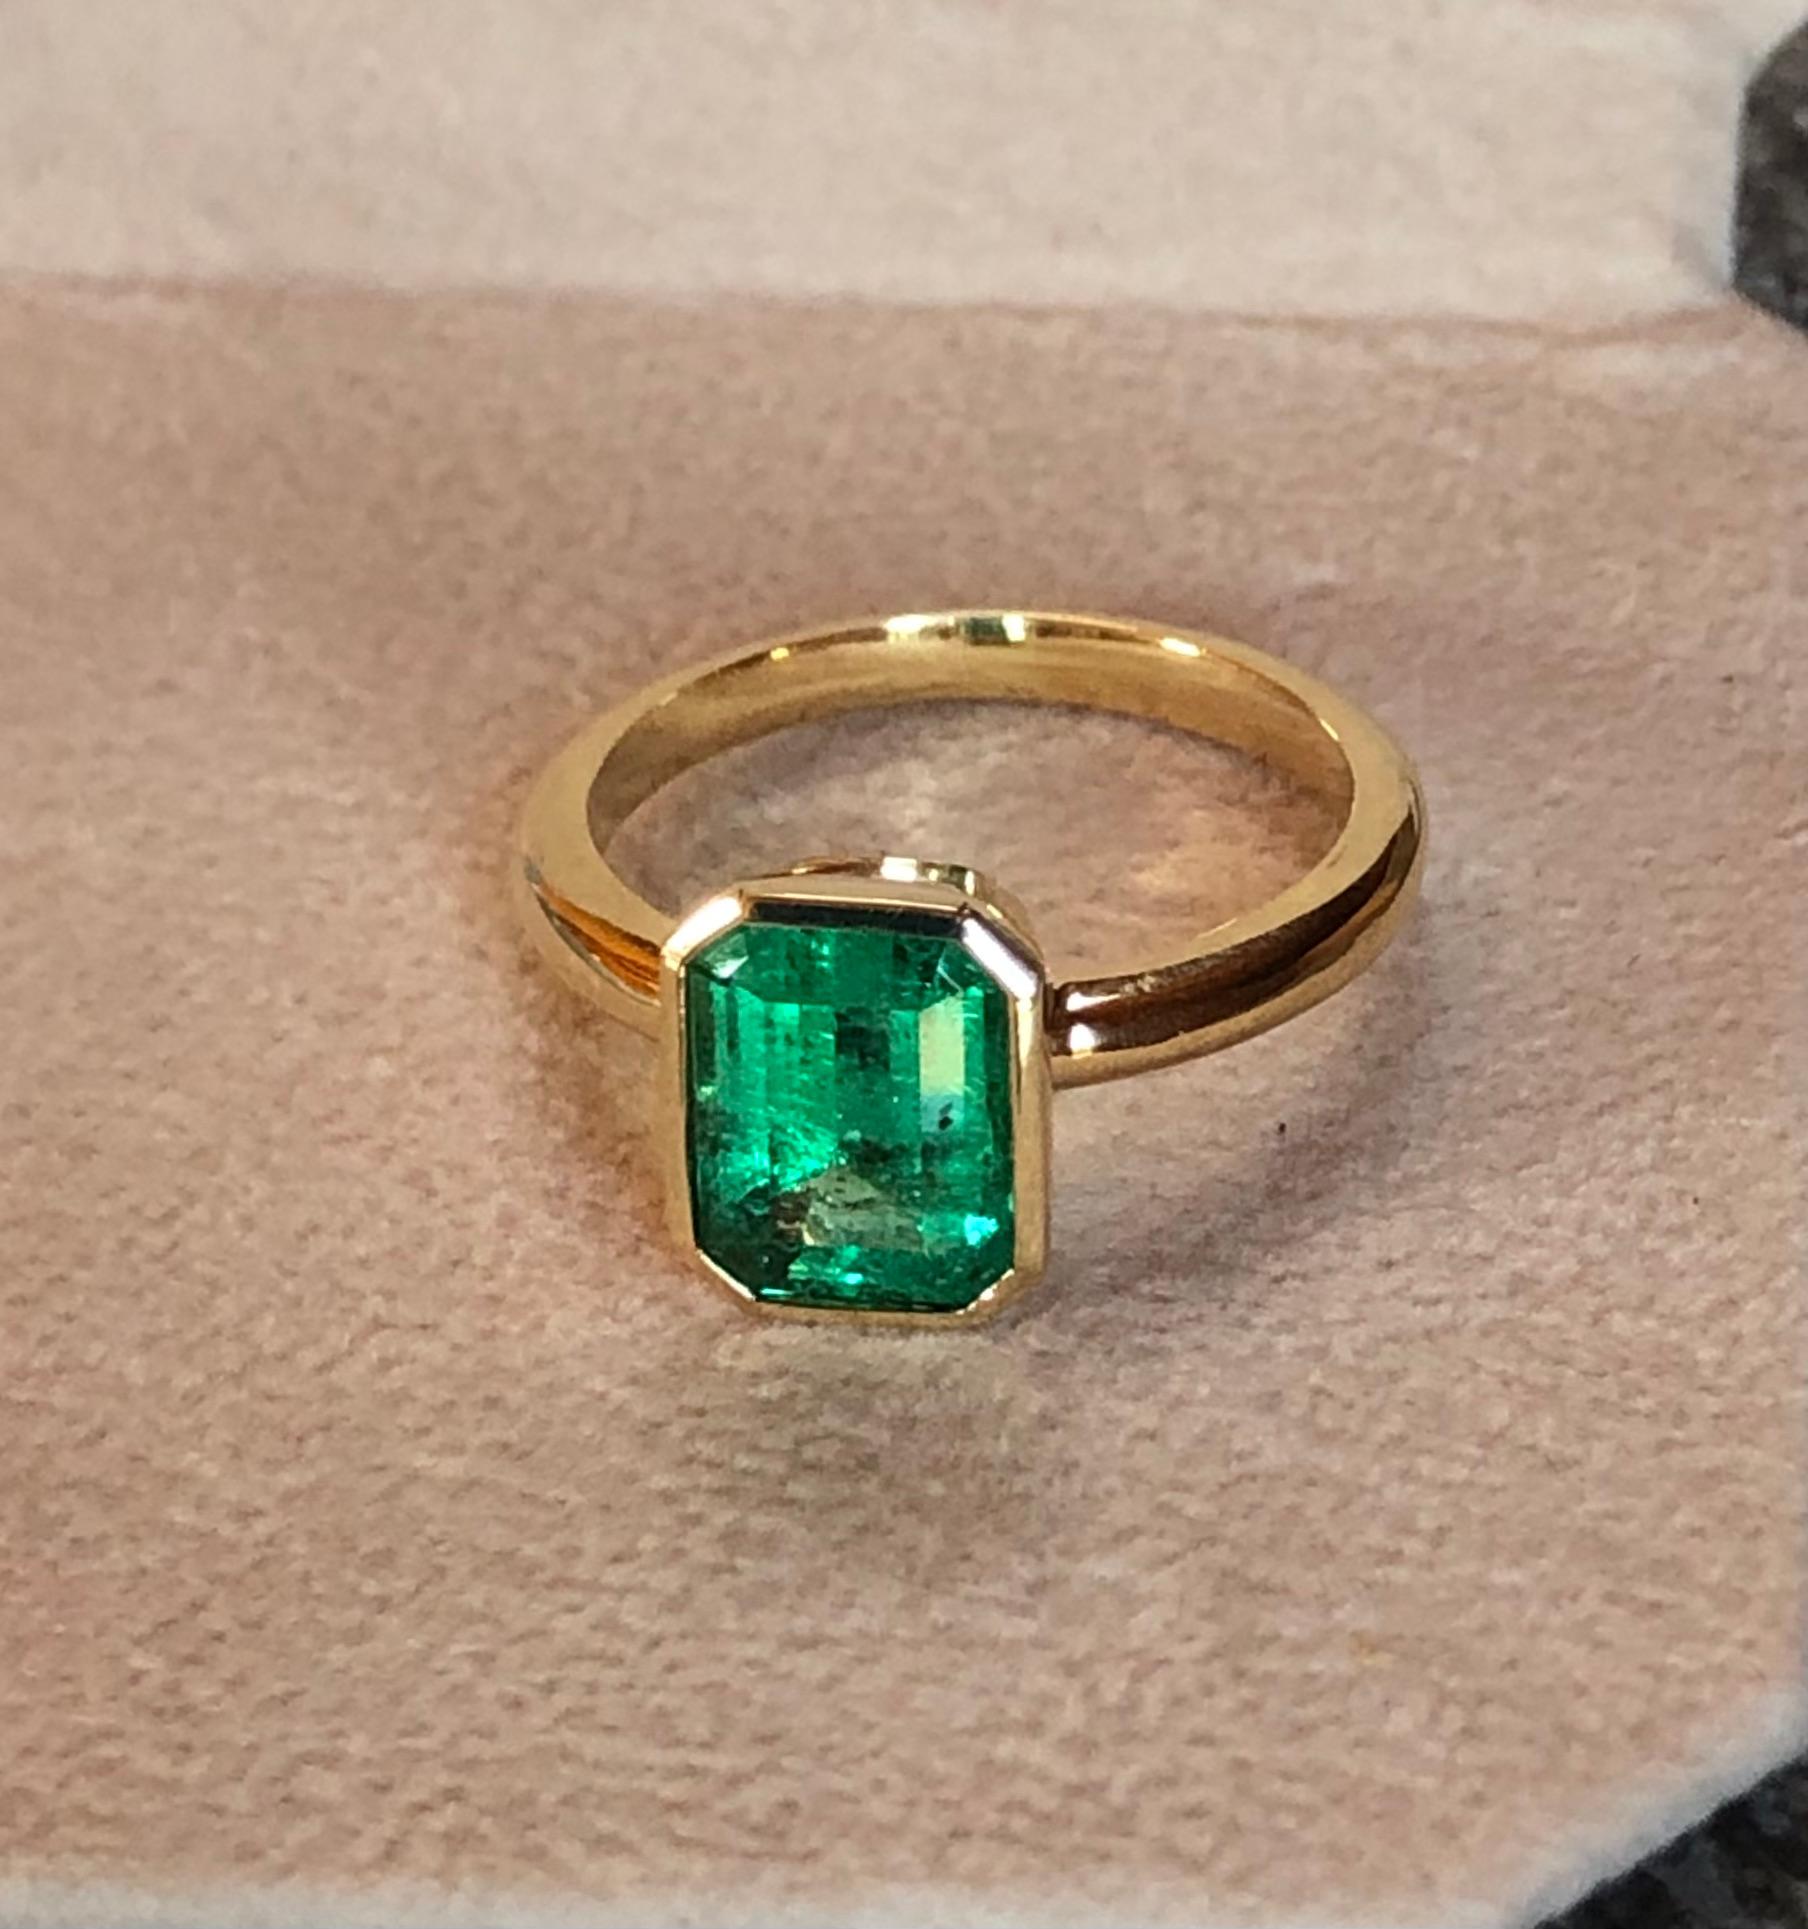 This is a stunning emerald bezel set solitaire engagement ring, the center stone is a natural Colombian emerald emerald cut weighing 2.32 carats. Lively medium green, VS clarity.  The engagement solitaire ring is made of solid yellow gold 18K. The